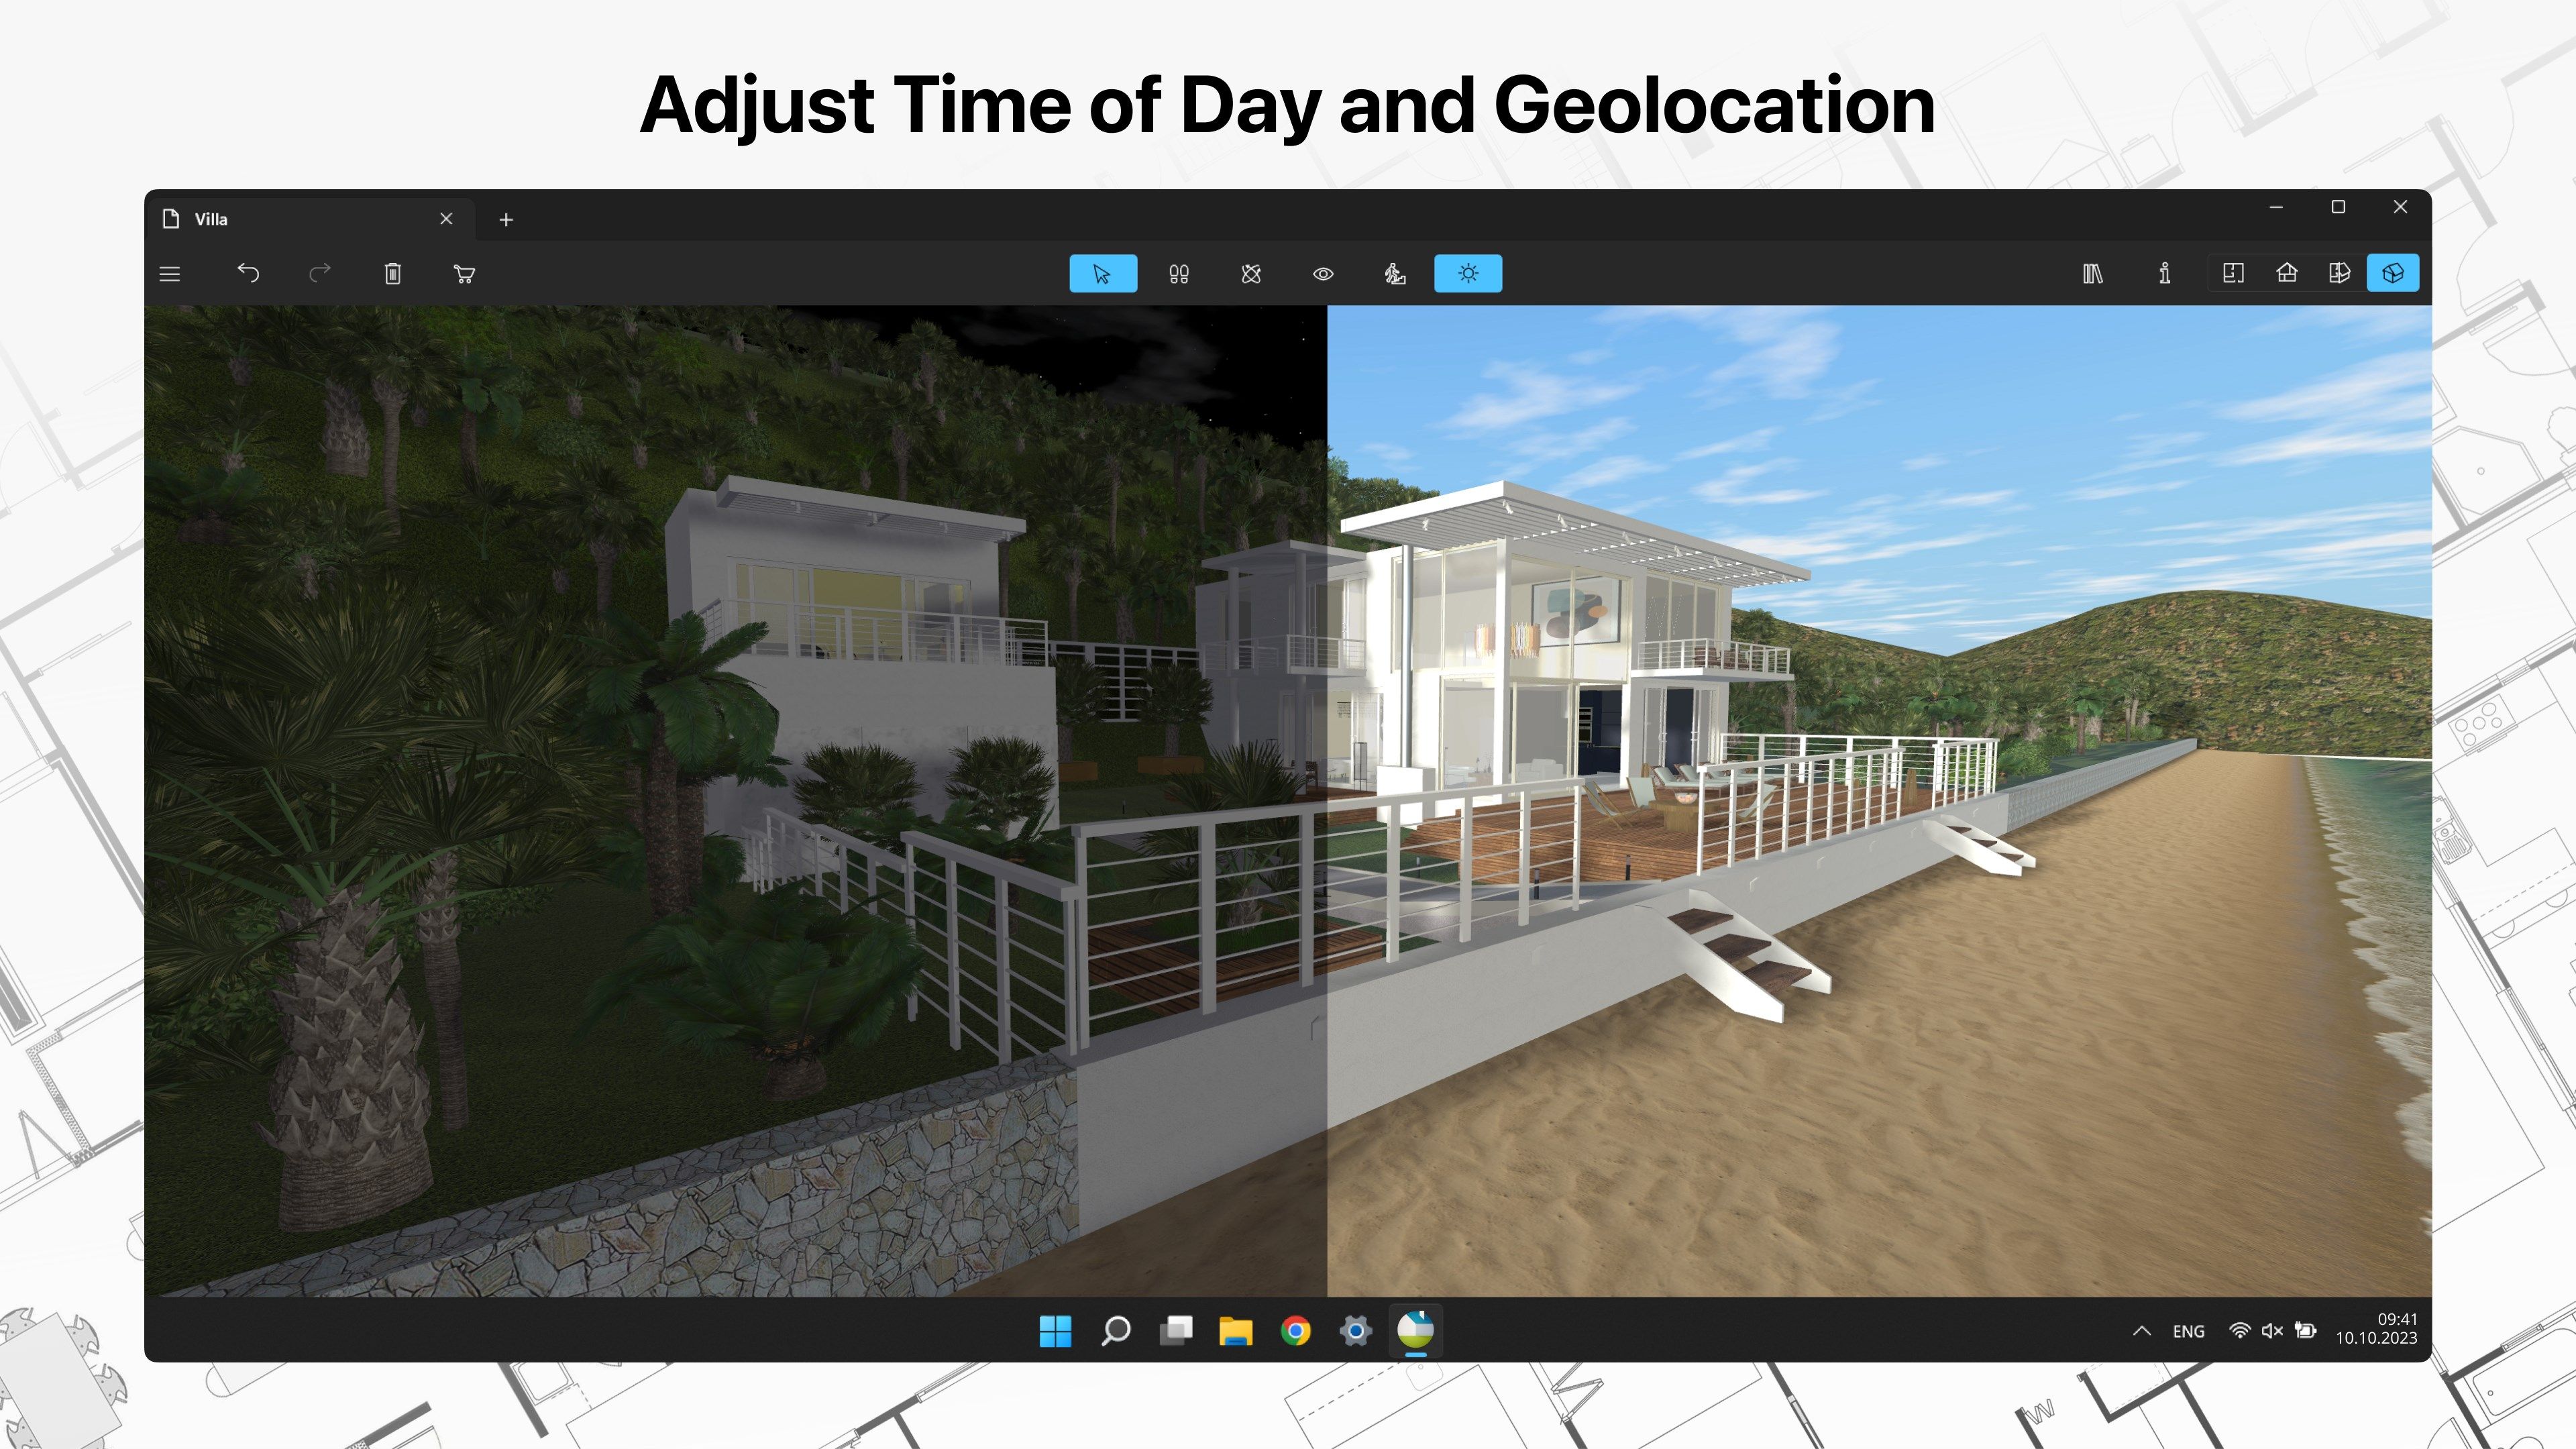 Adjust Time of Day and Geolocation